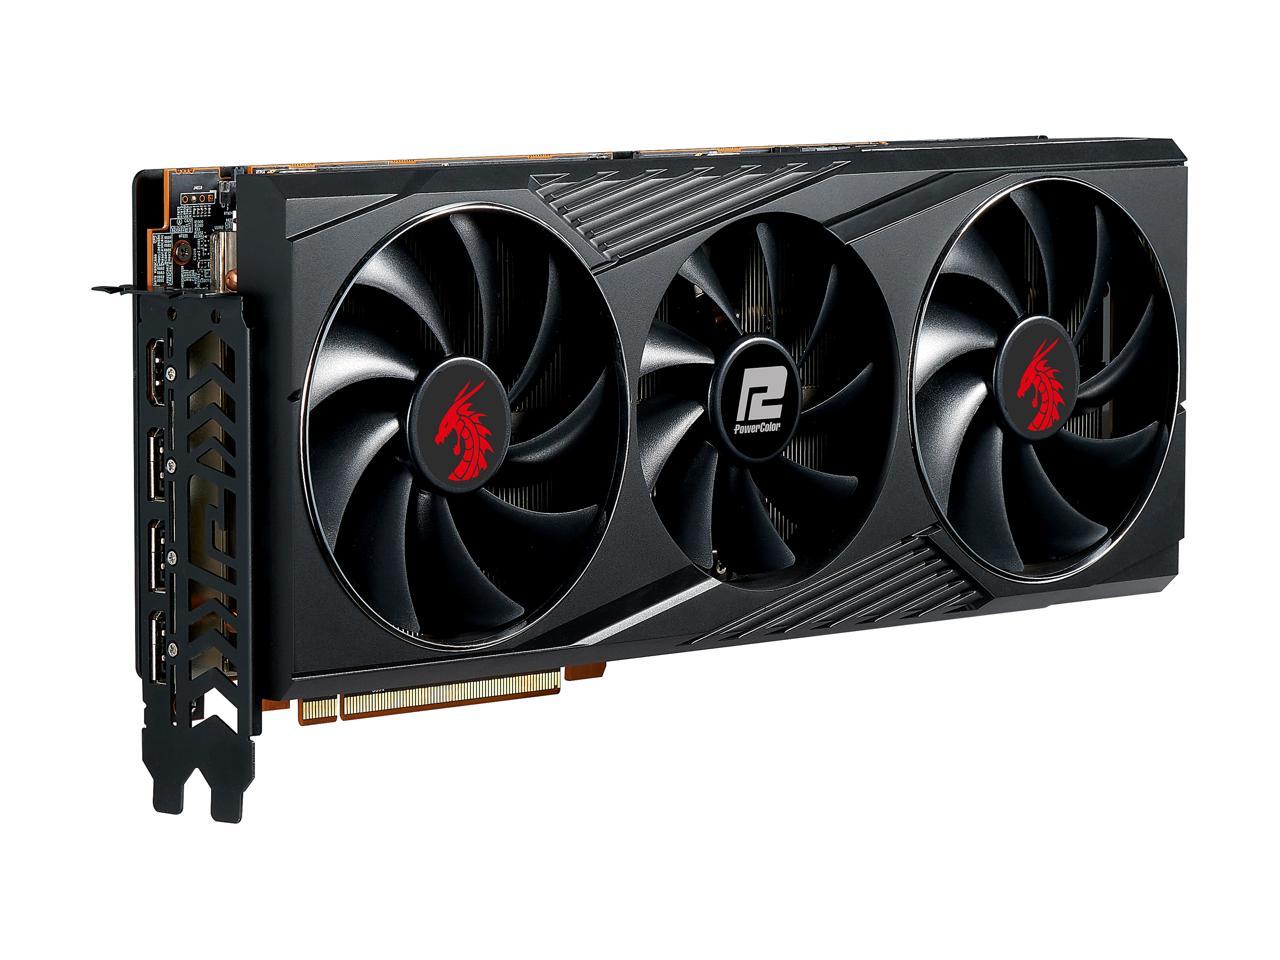 PowerColor Red Dragon AMD Radeon RX 6800 Gaming Graphics card with 16GB GDDR6 Memory, Powered by AMD RDNA 2, Raytracing, PCI Express 4.0, HDMI 2.1, AMD Infinity Cache